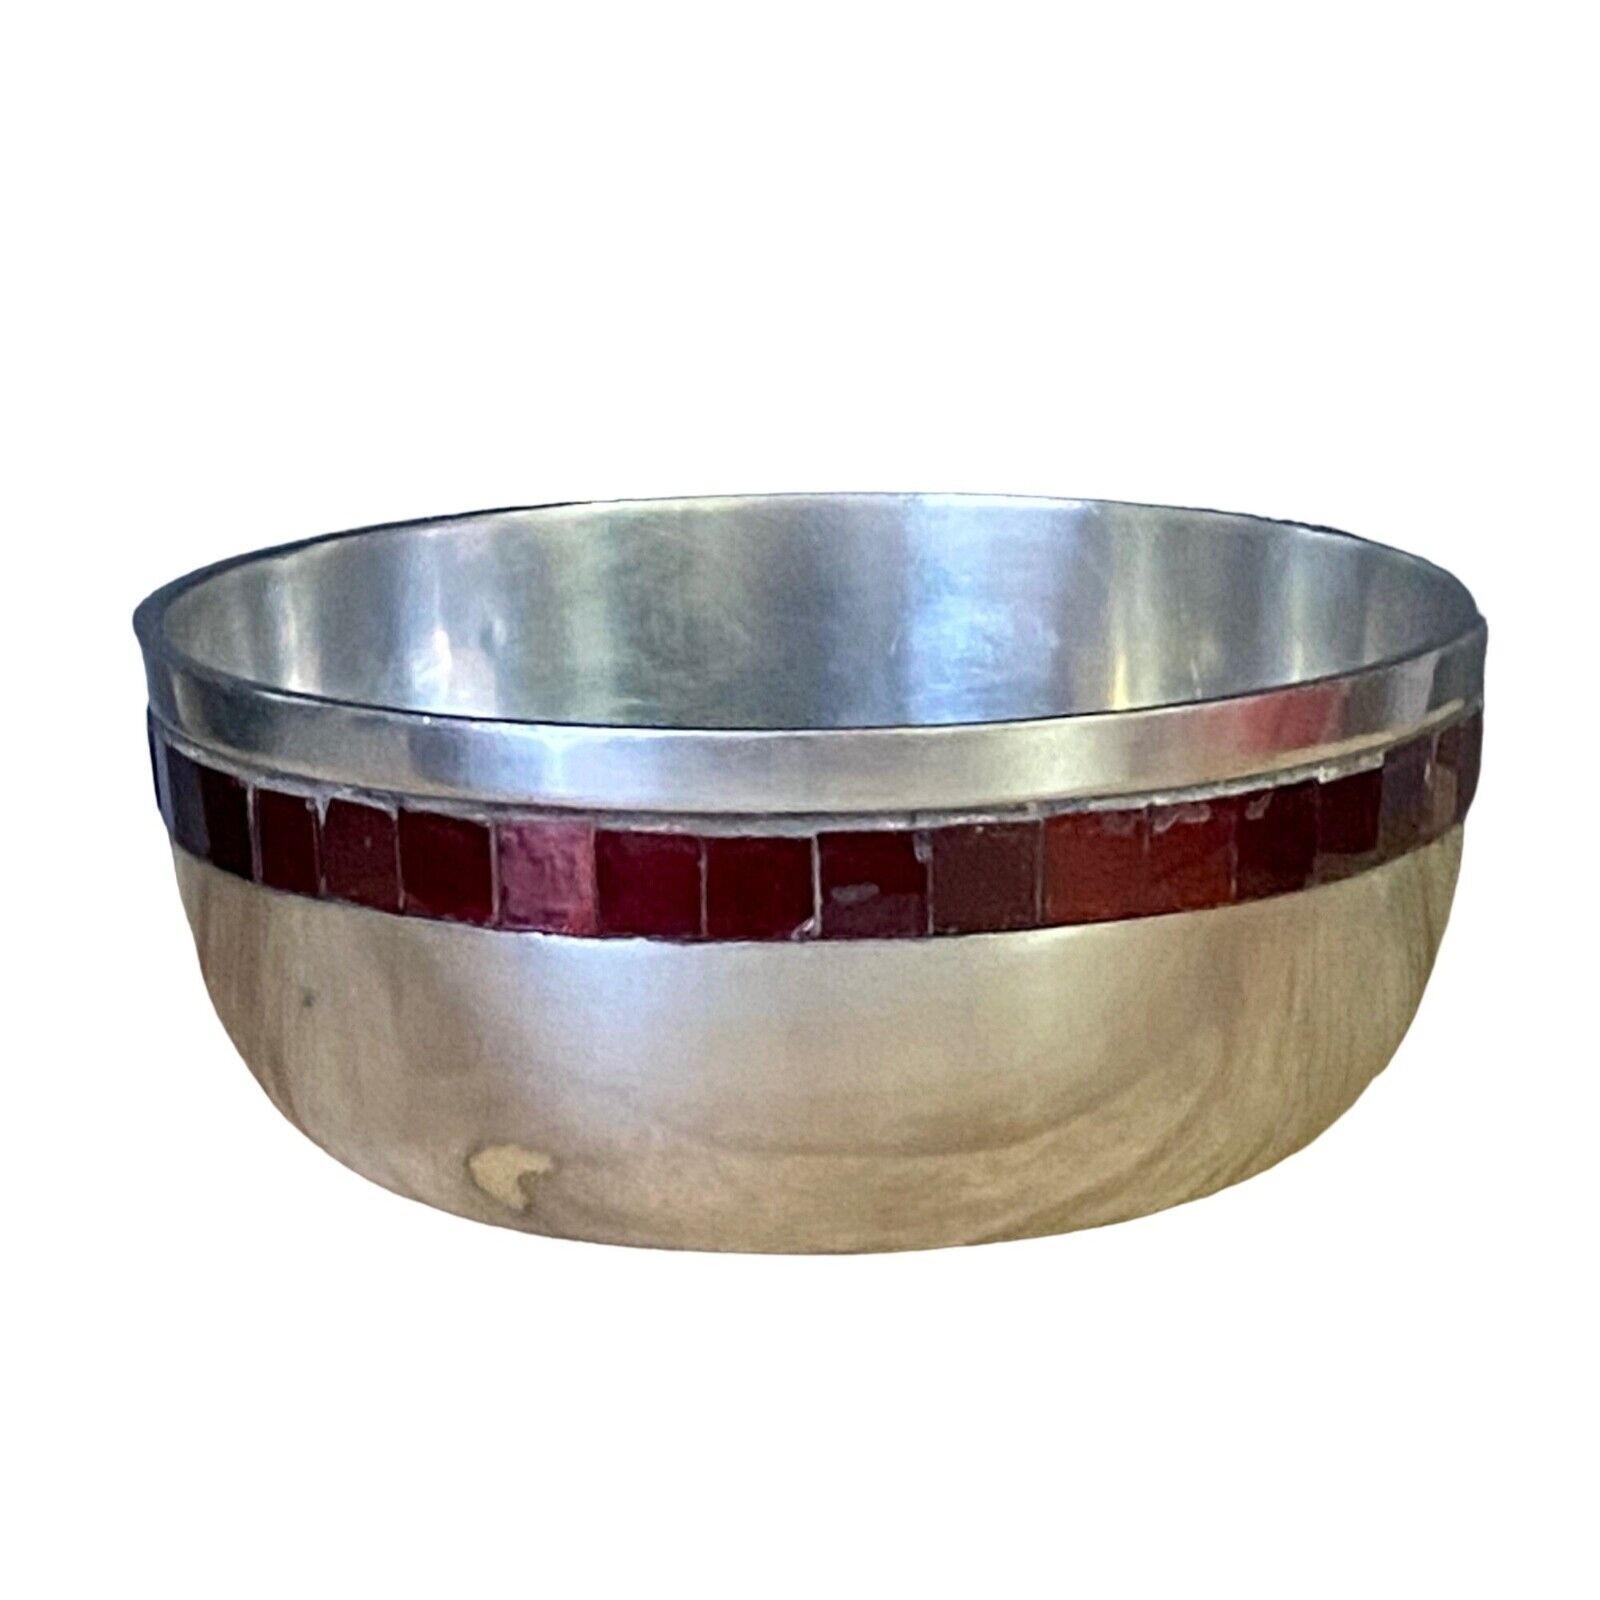 SILVER METAL BOWL WITH RUBY RED INLAY BANDSILVER METAL BOWL WITH RUBY RED INLAY